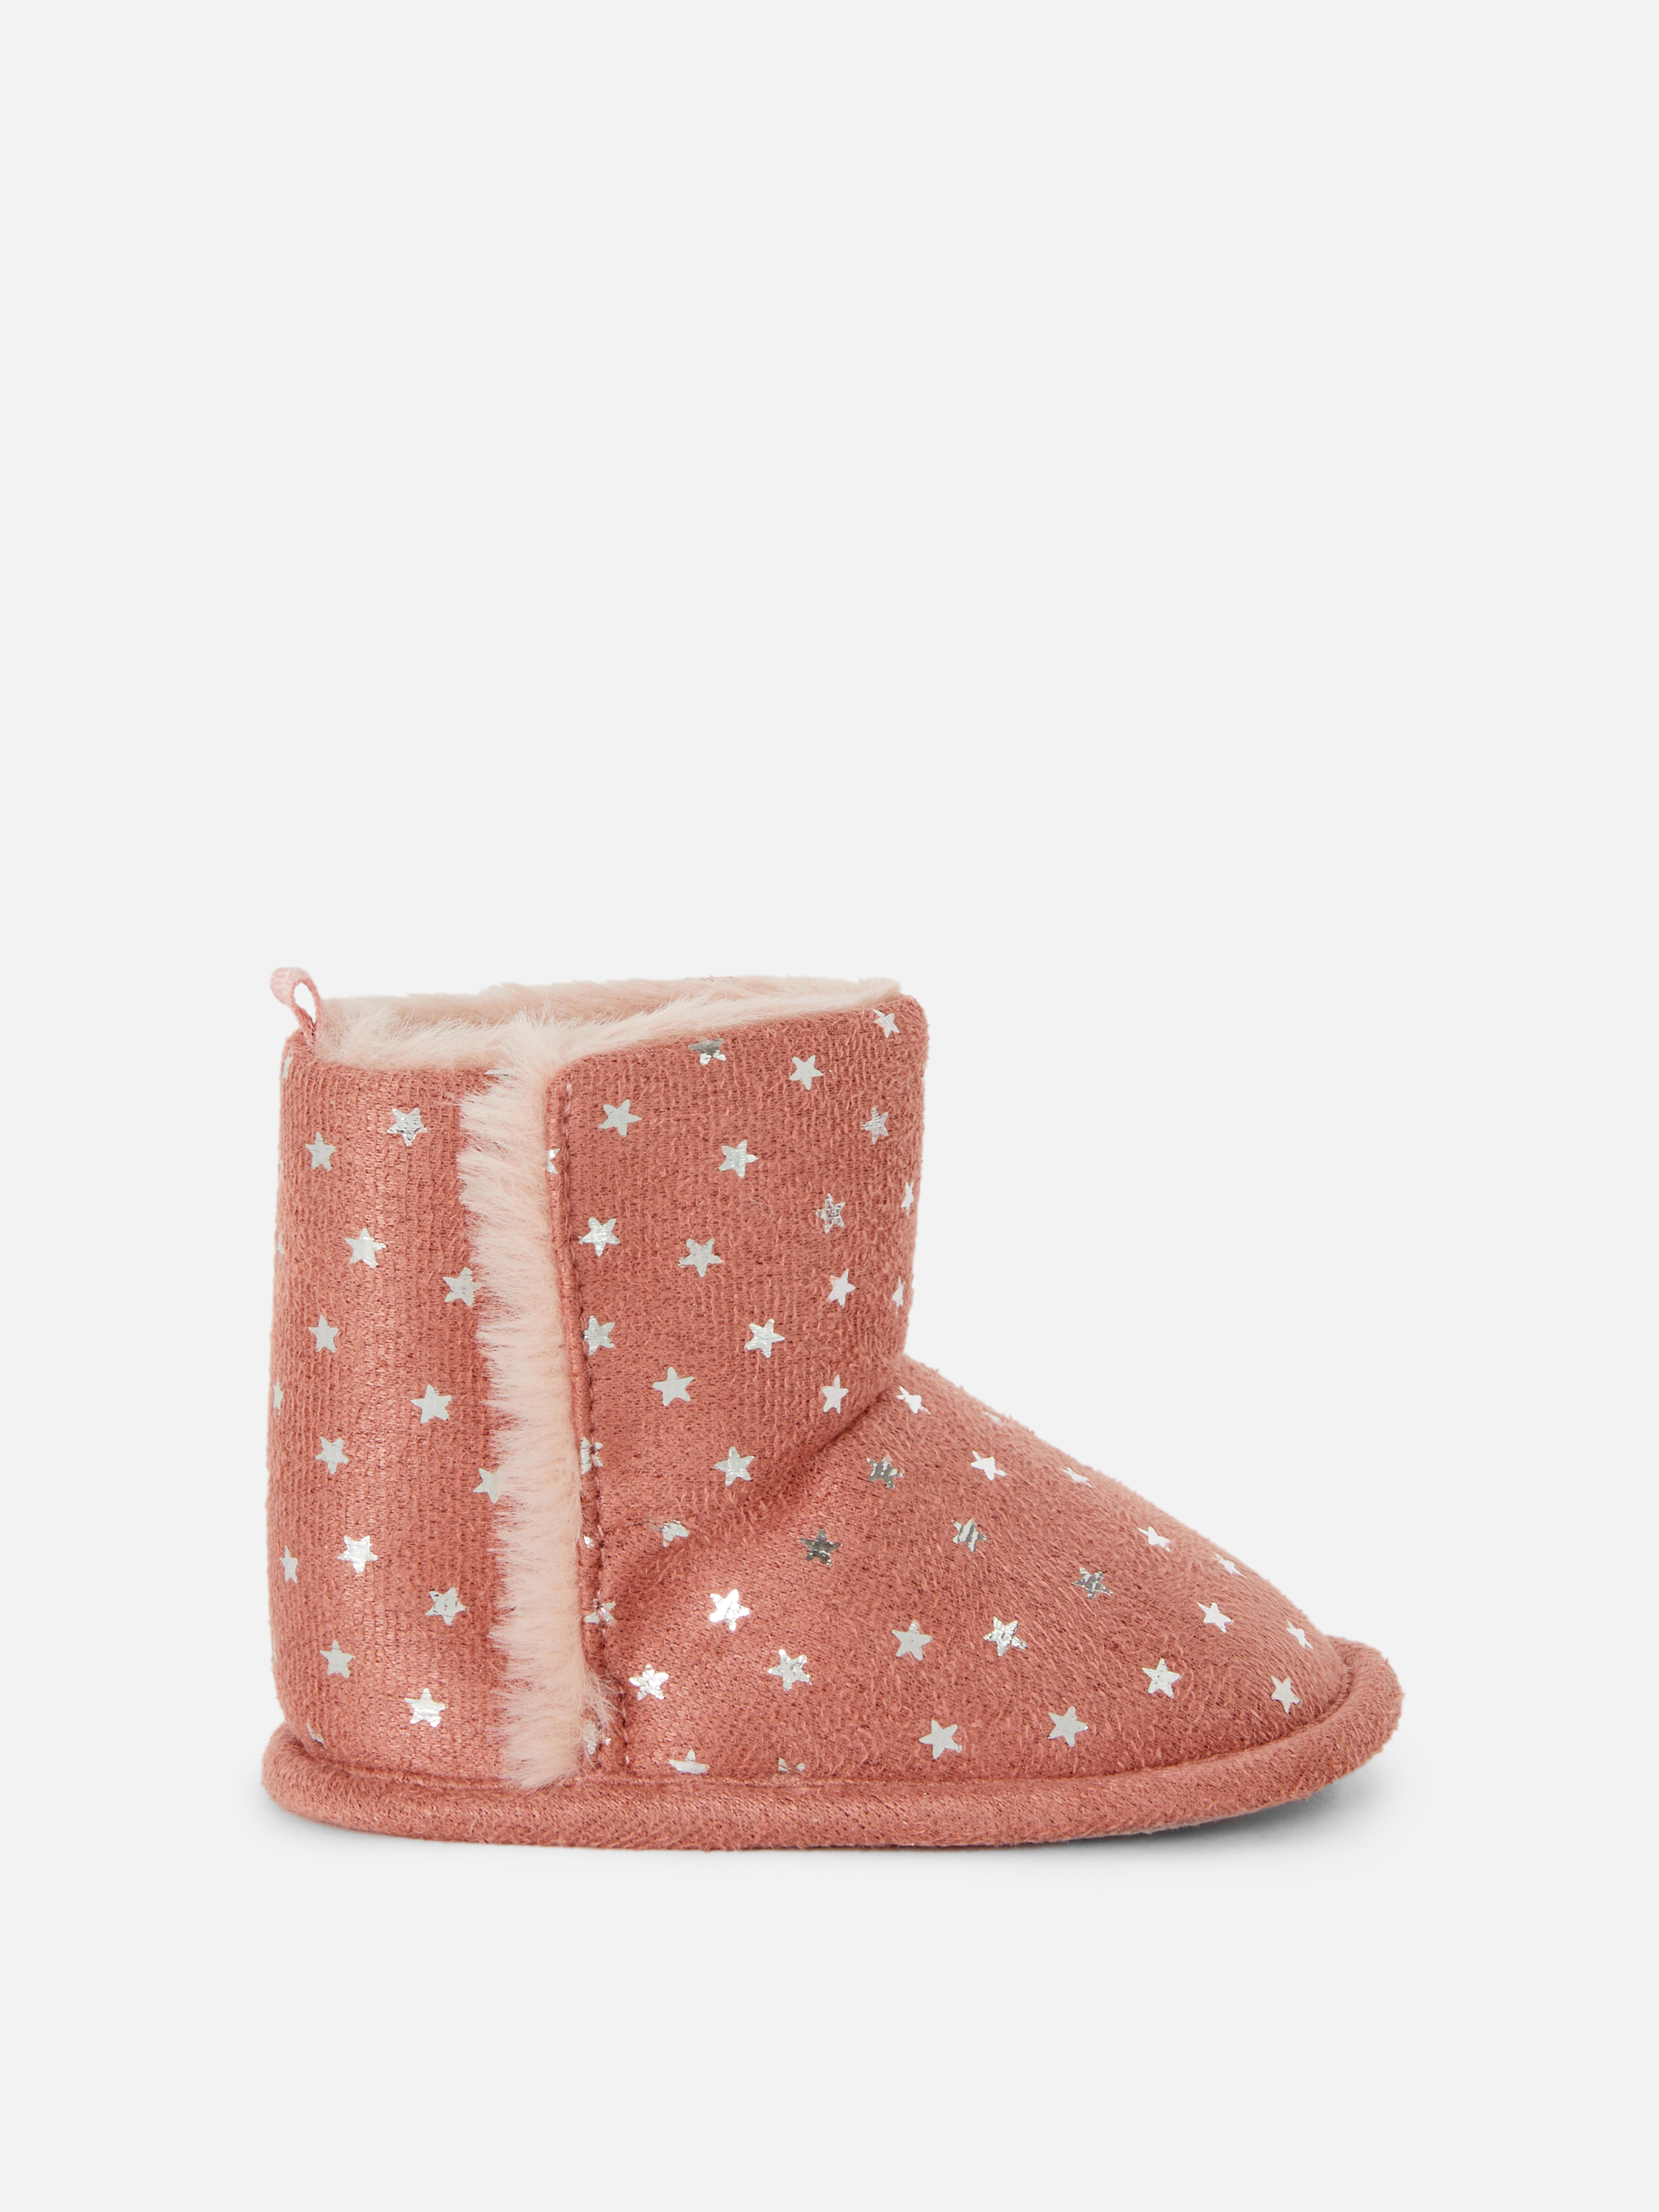 Star Print Bootie Slippers